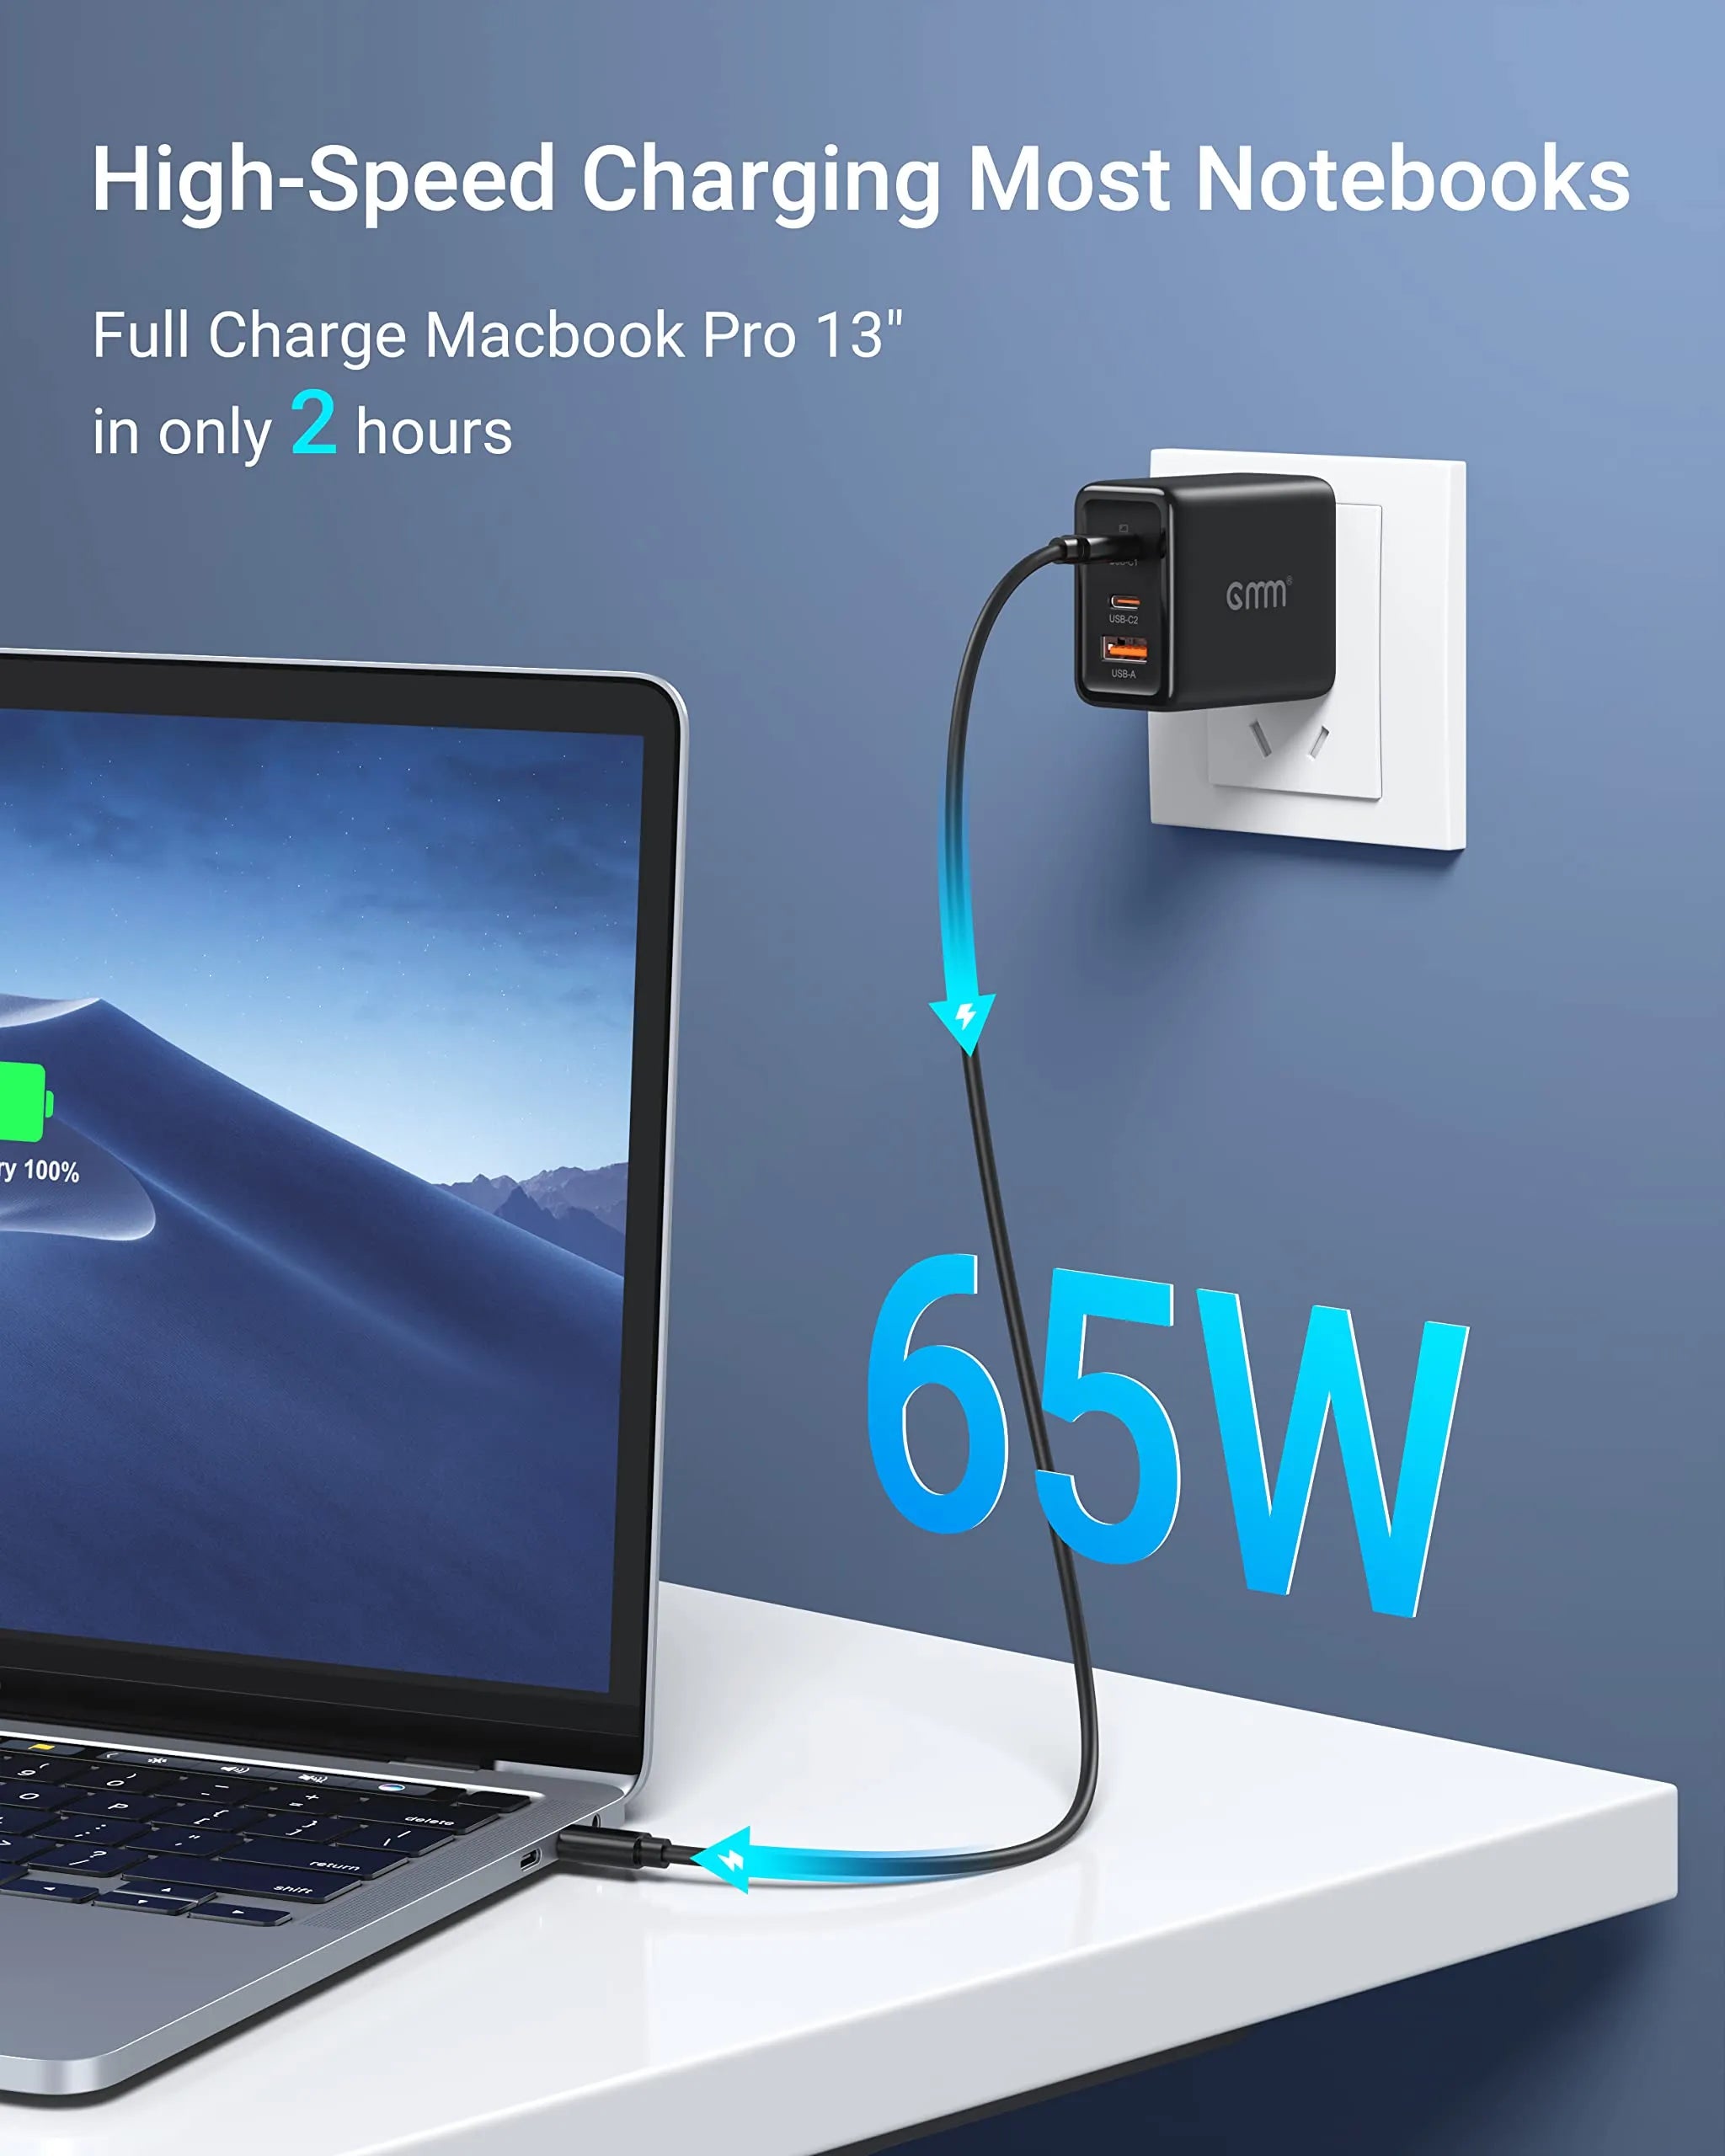 GMM 65W USB C Charger for iPhone/Laptops